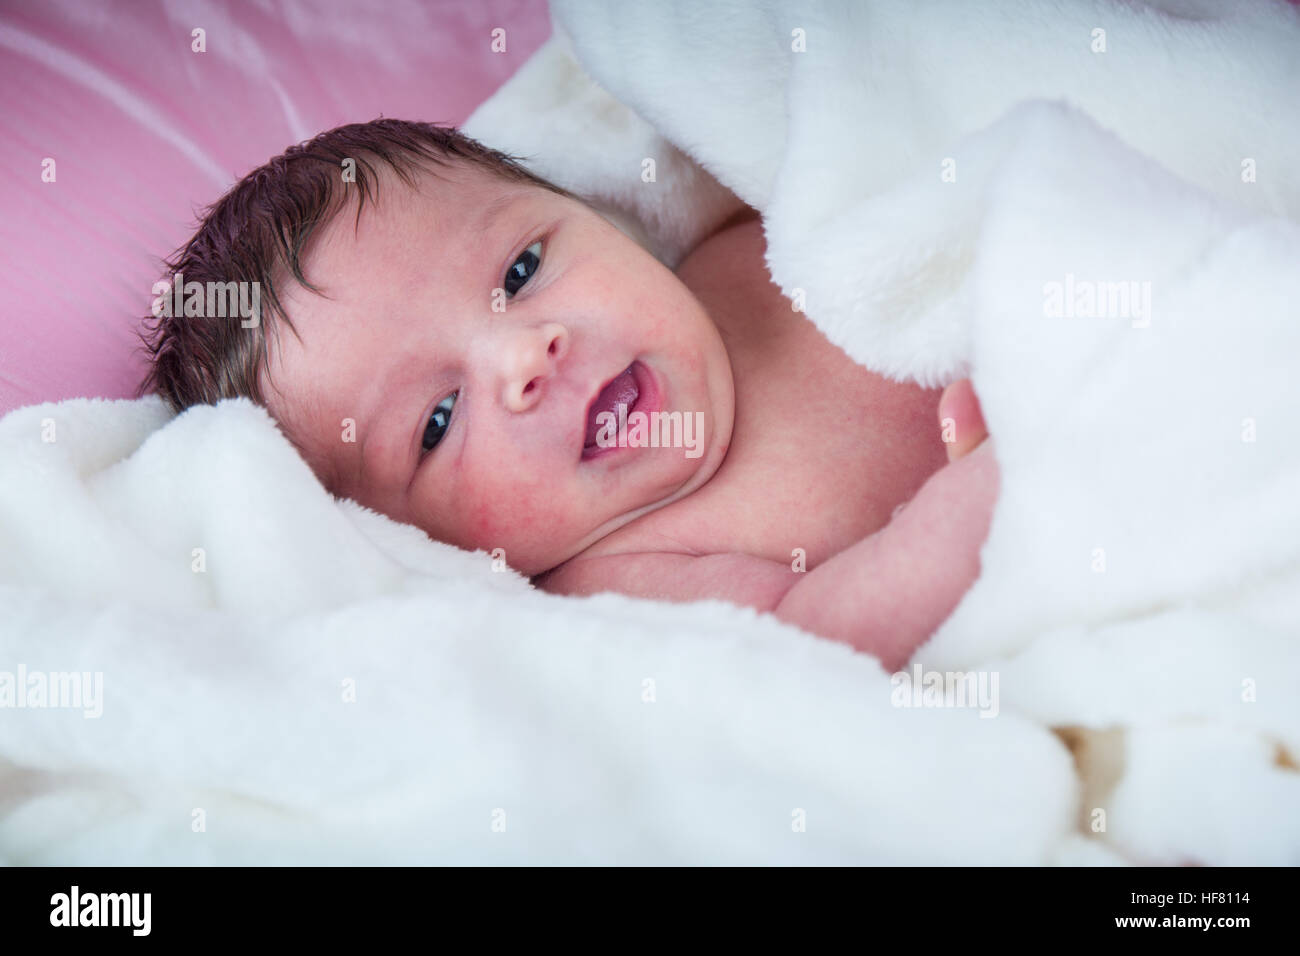 Twelve day old baby girl wrapped in a blanket Stock Photo